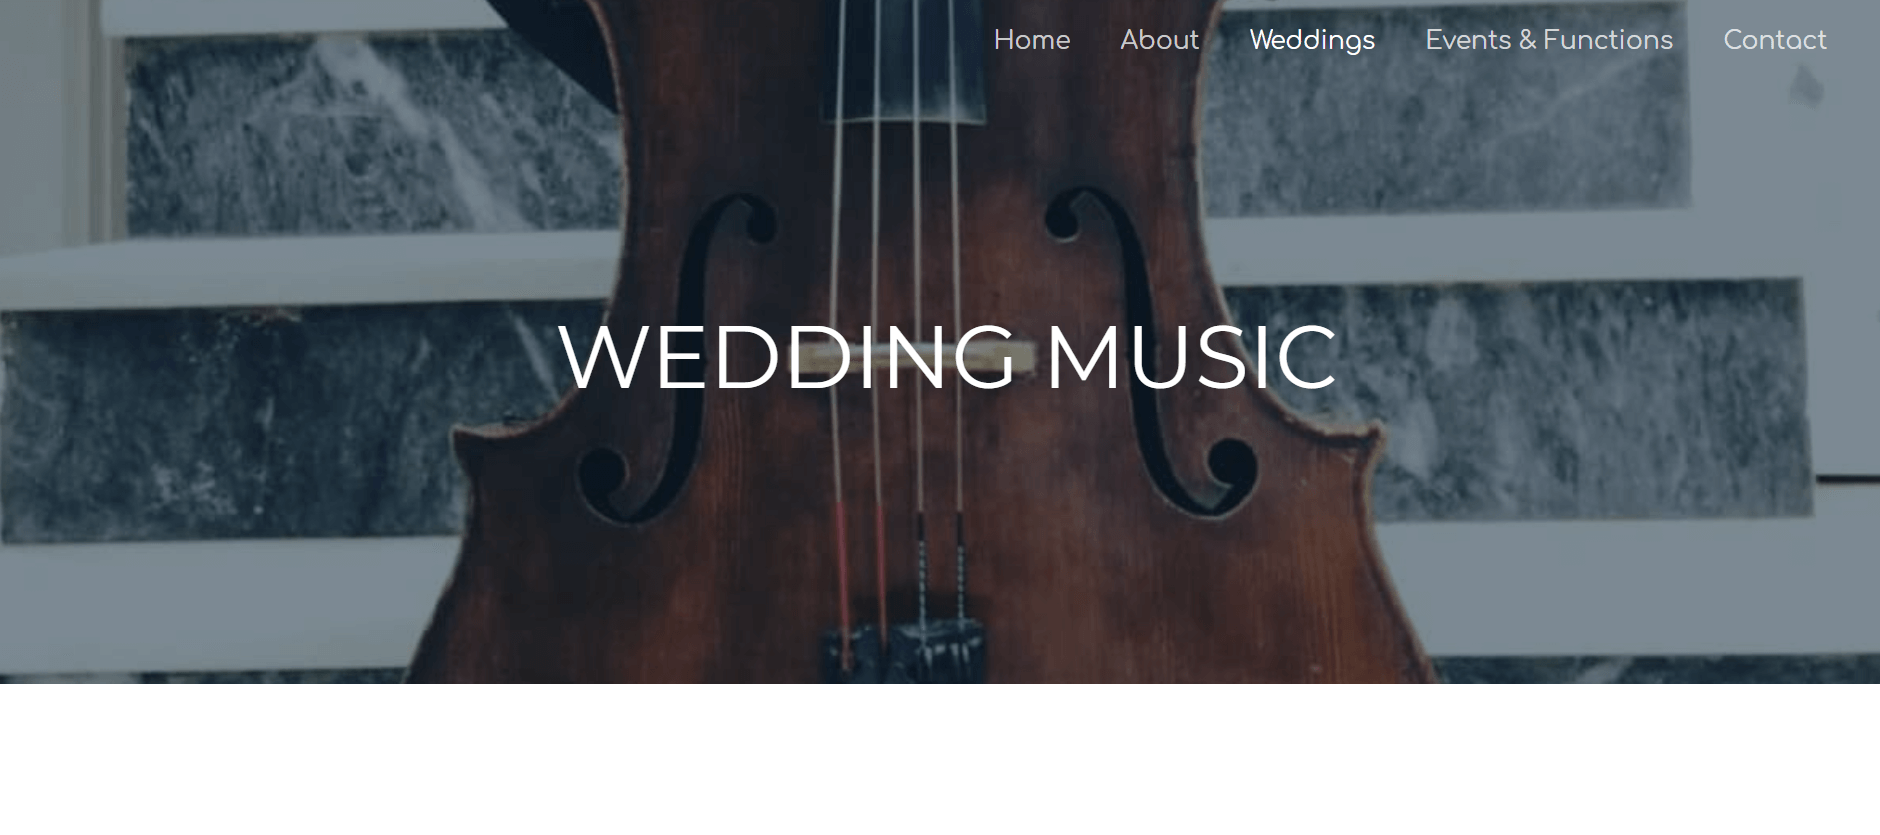 Top 30 Wedding Bands, Singers & Musicians Melbourne [2021]  by Wild Romantic Photography Melbourne